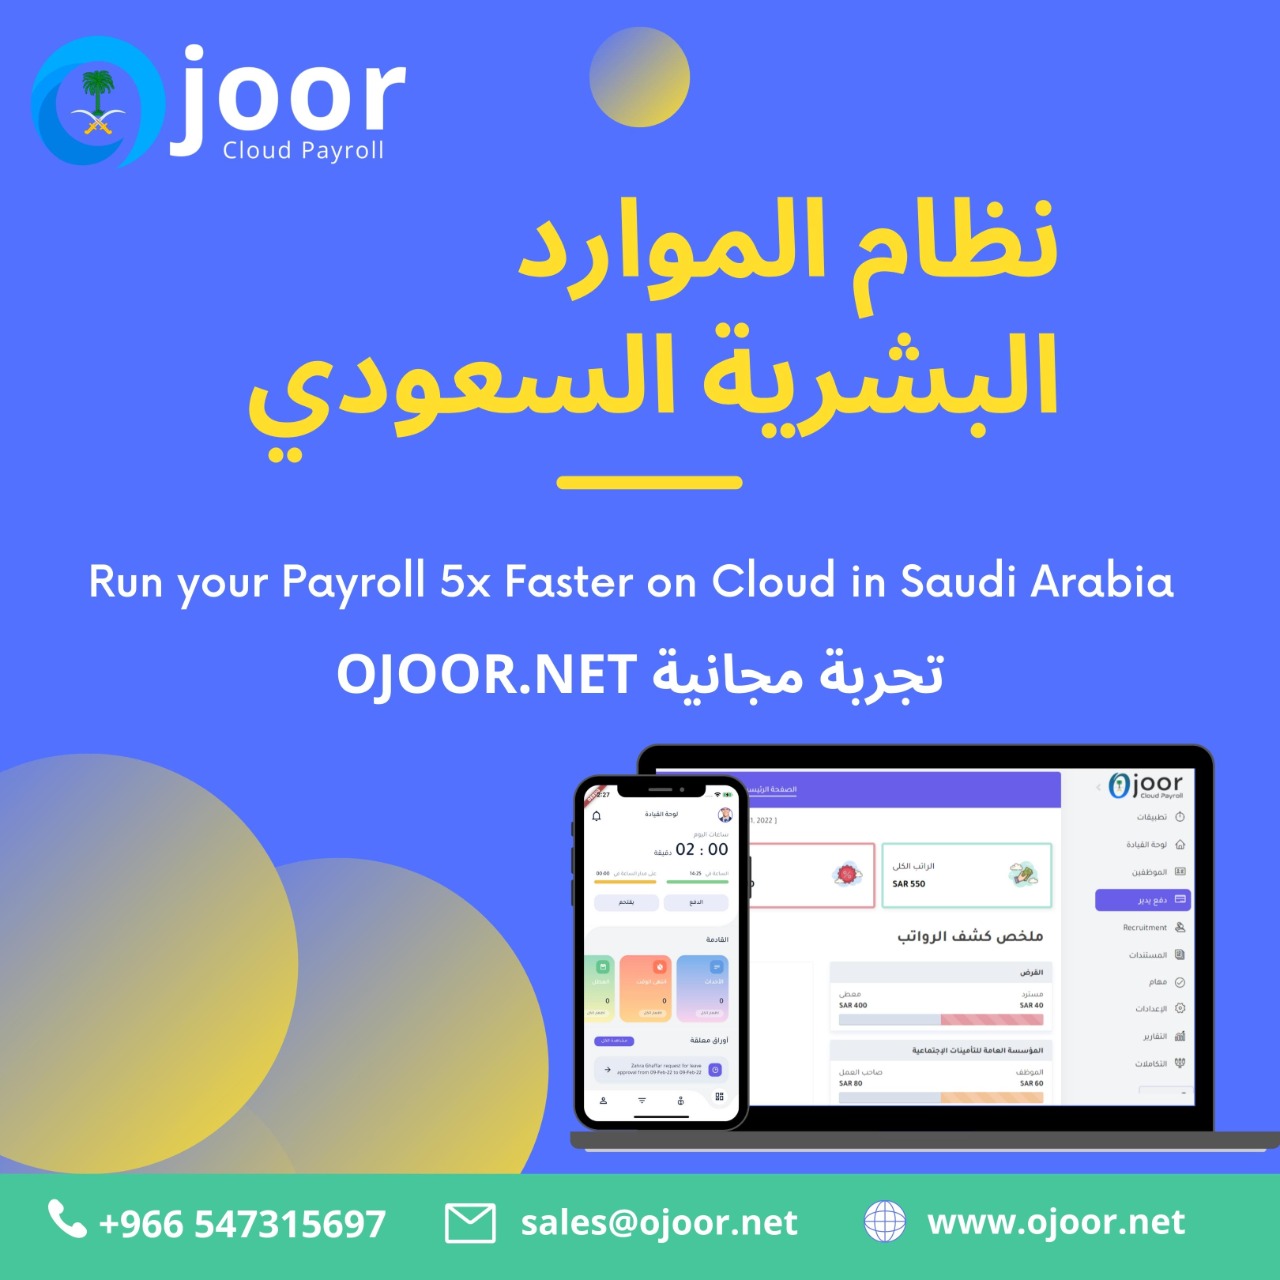 Which are the Tips For Choosing The Right Payroll System in Saudi?